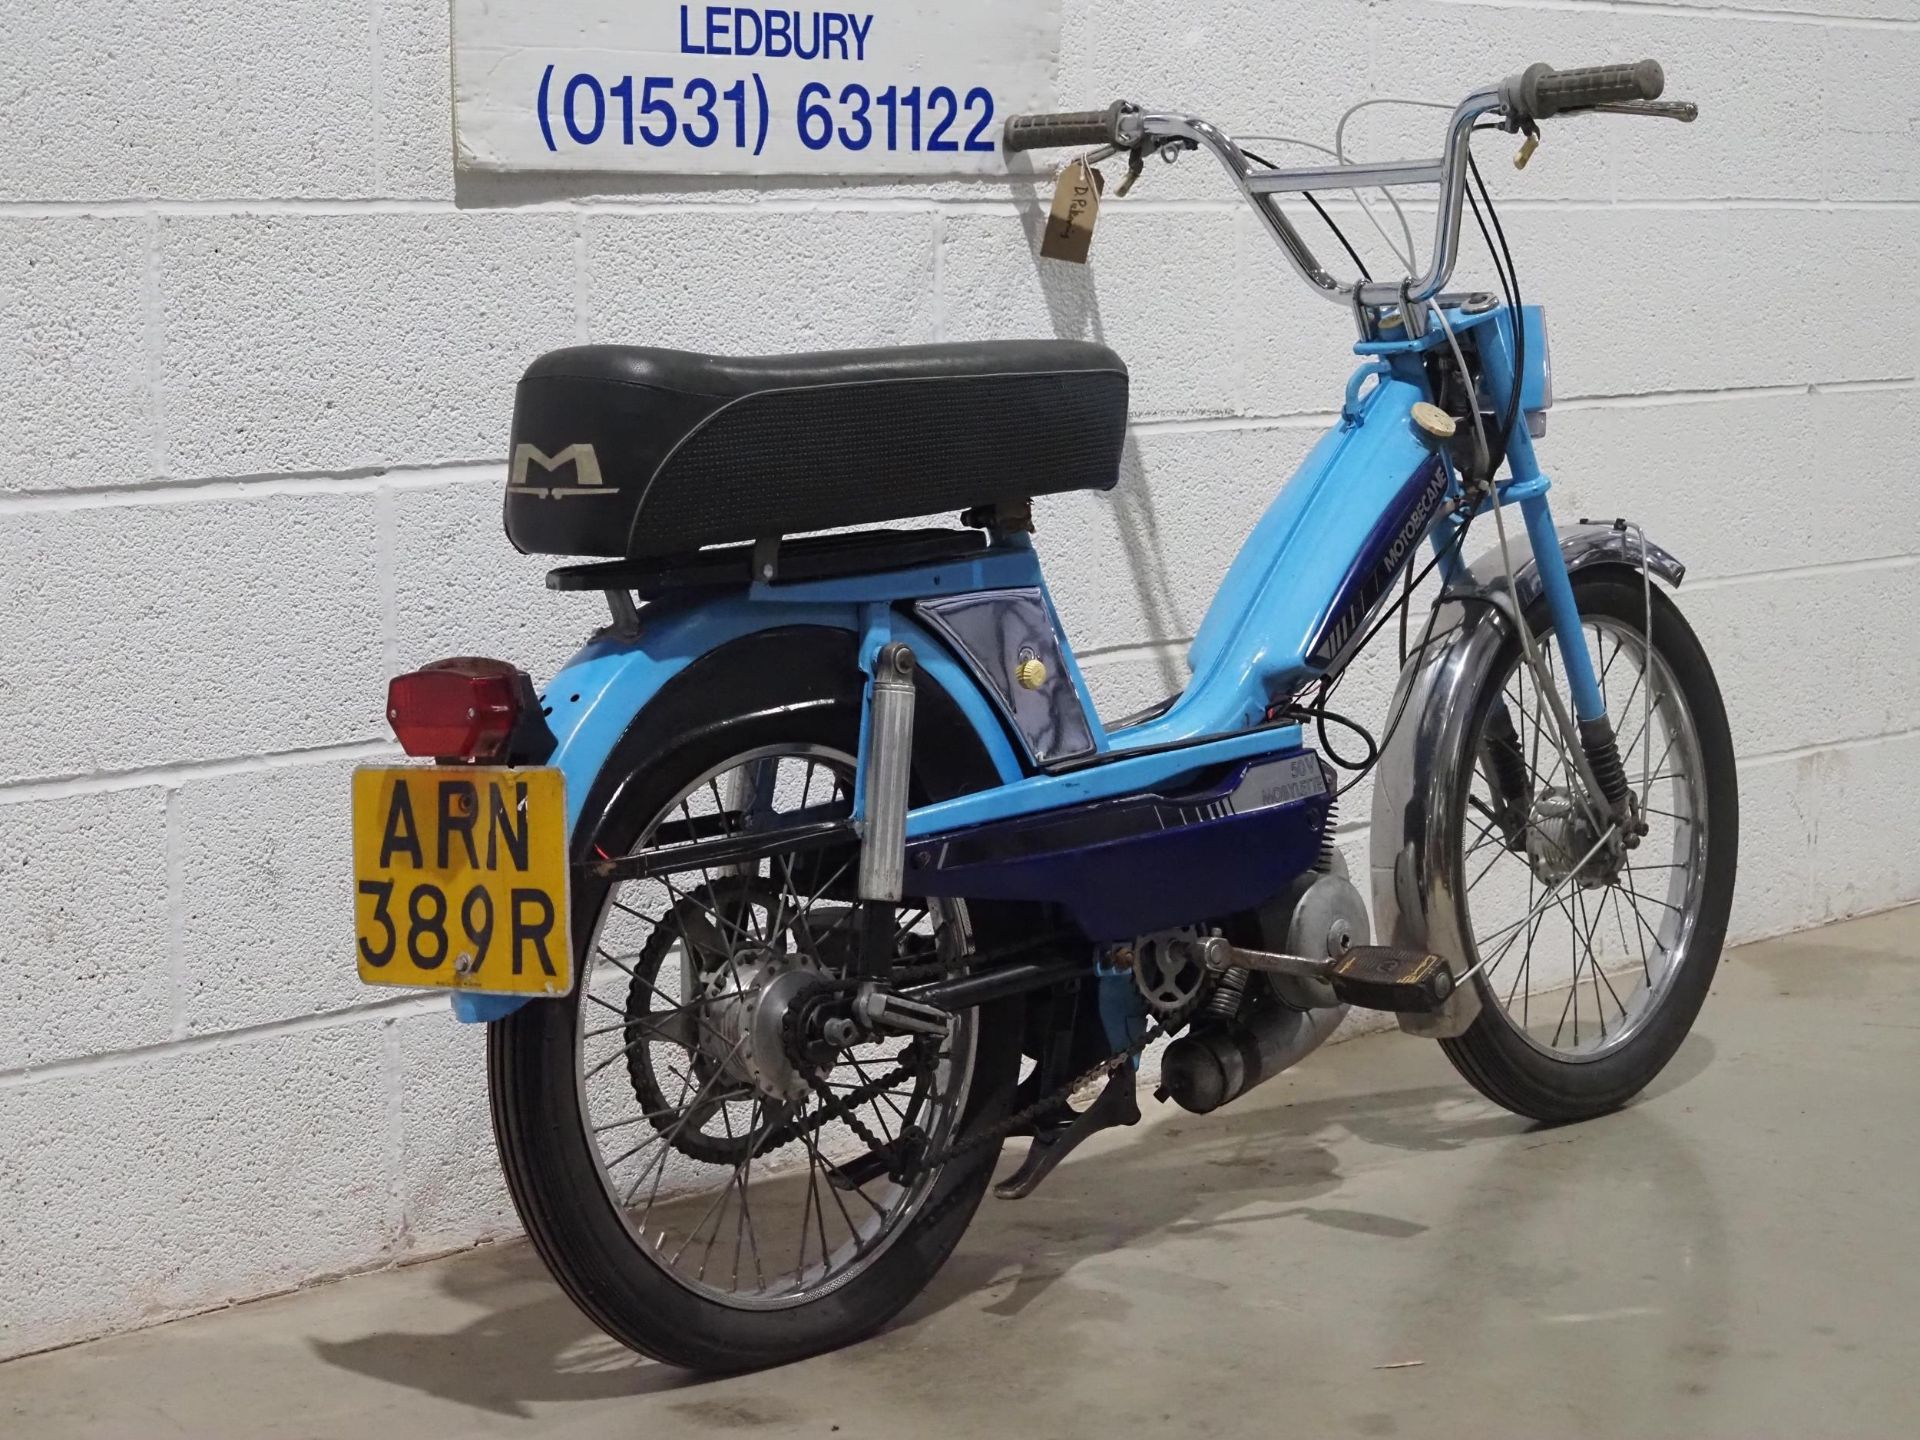 Motobecane 50V Mobylette moped. 1977. 49cc. Was running when stored some time ago and so will need - Image 3 of 6